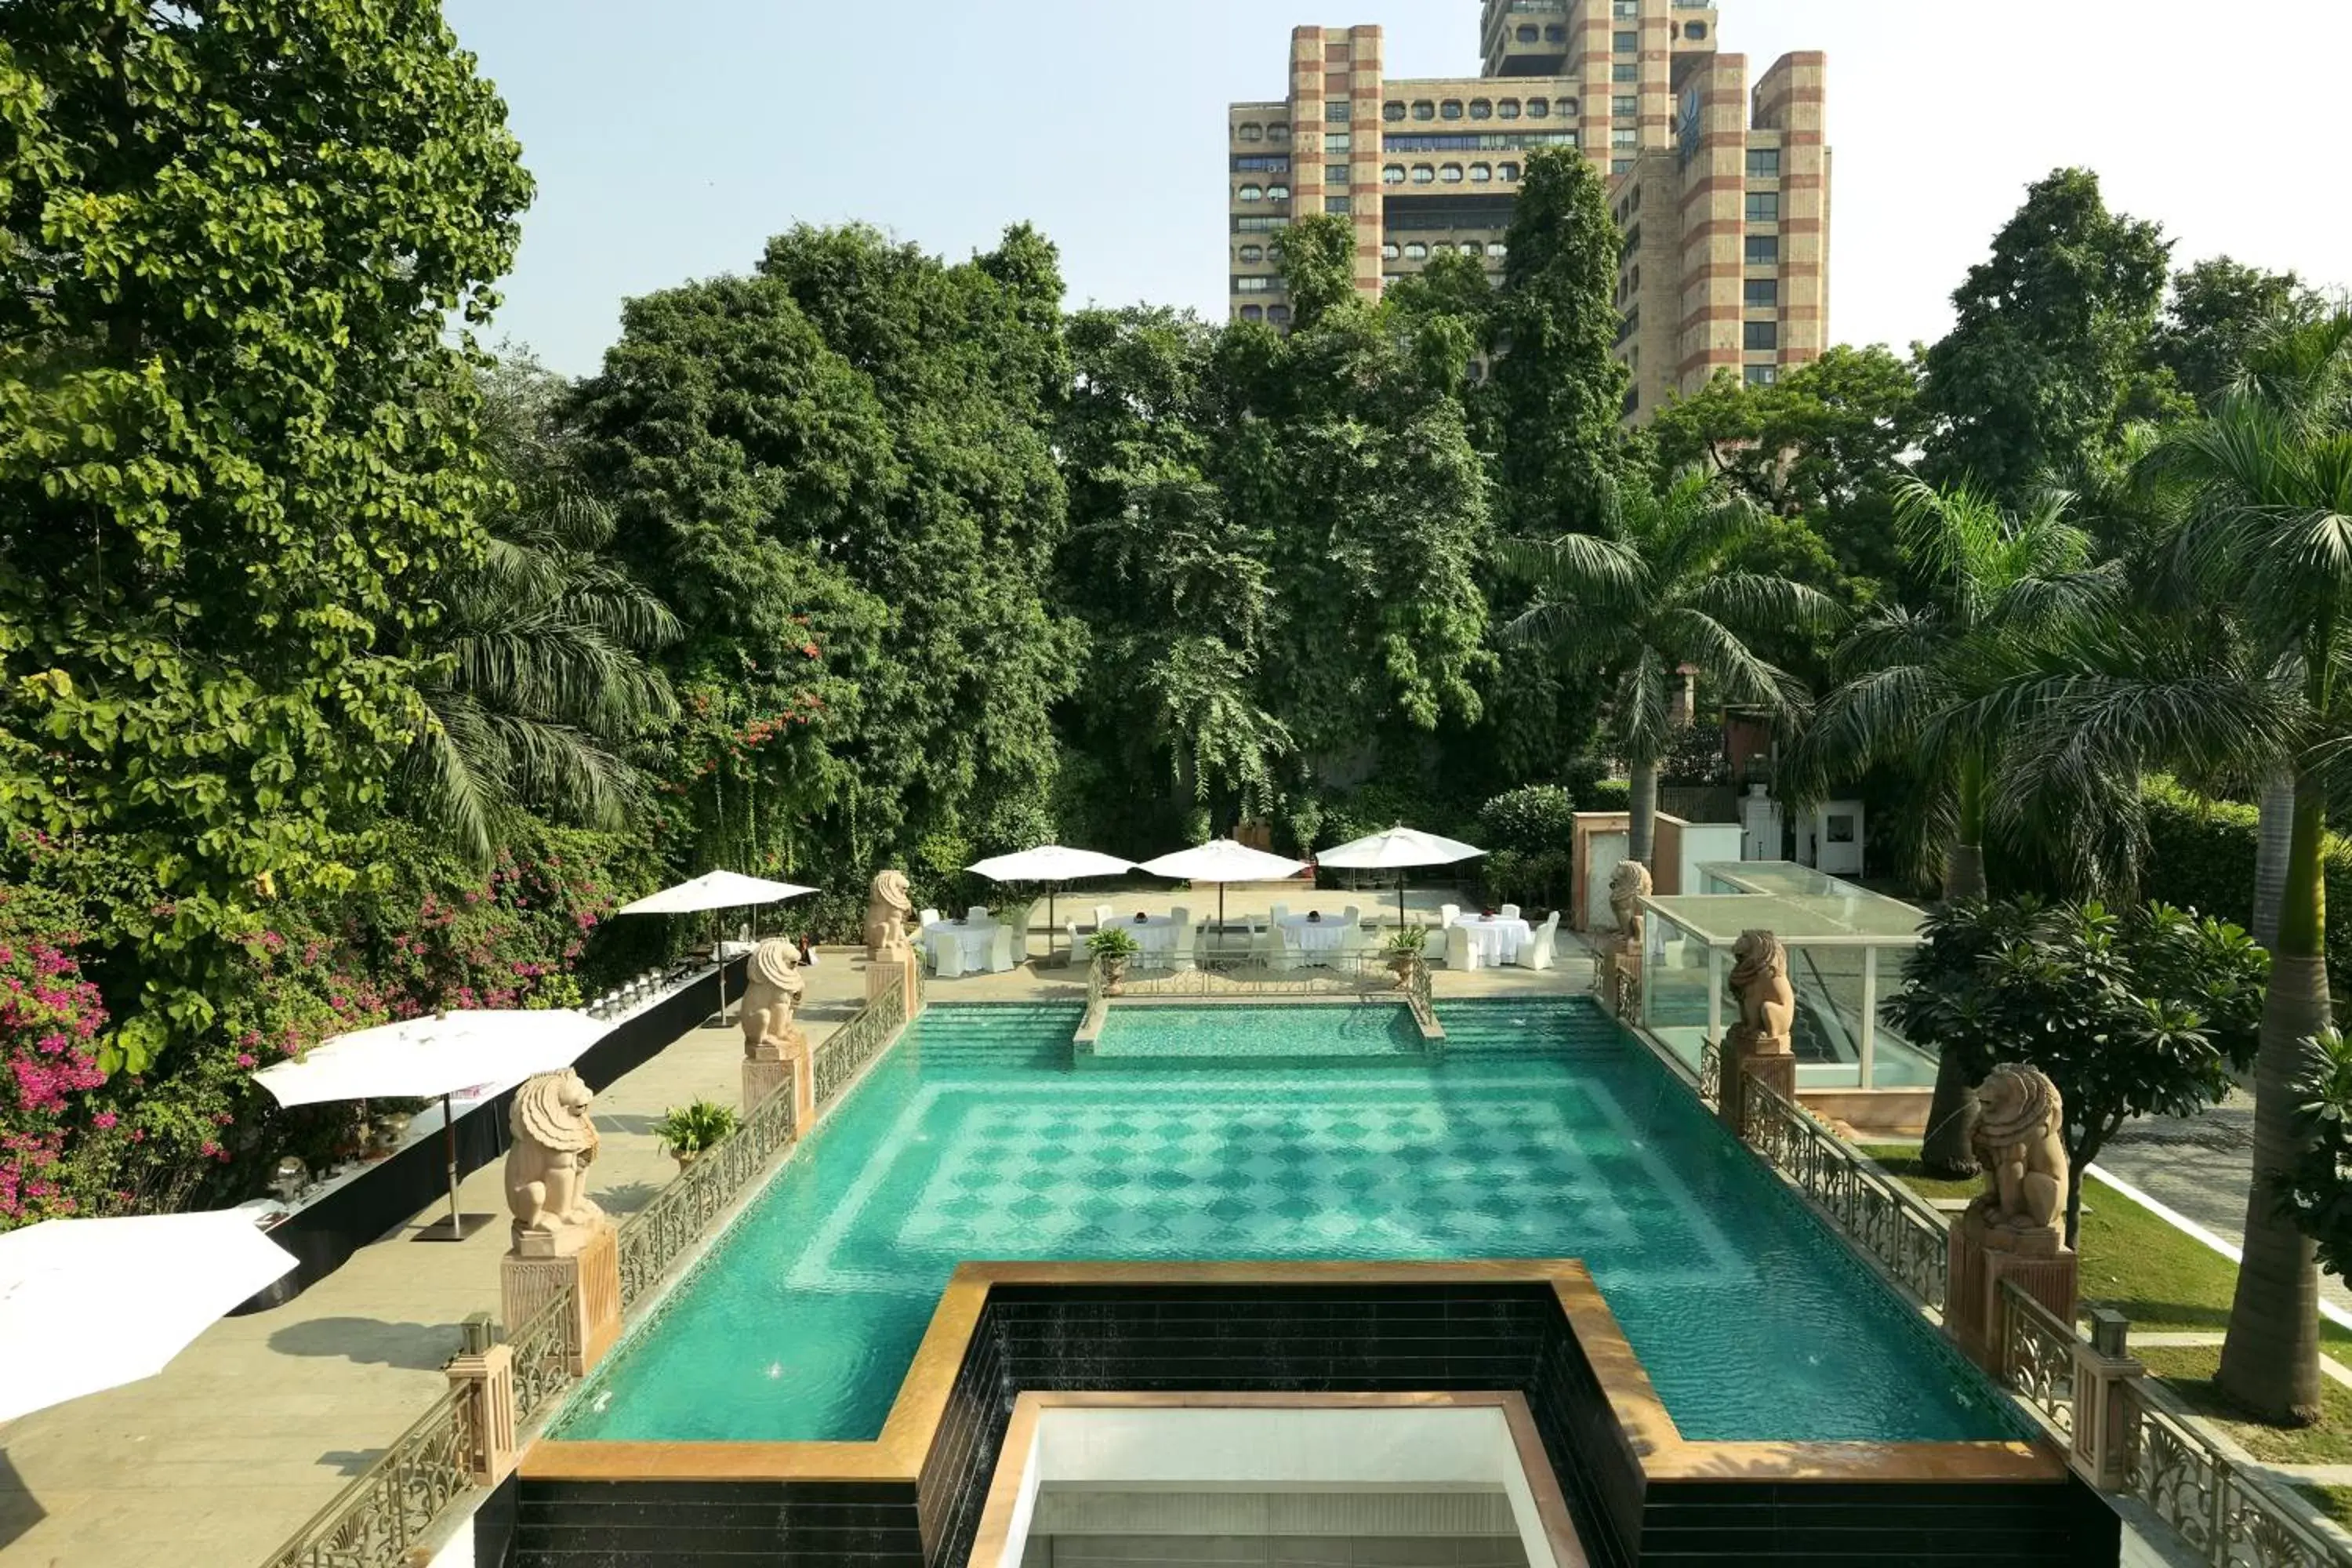 Property building, Pool View in The Imperial Hotel